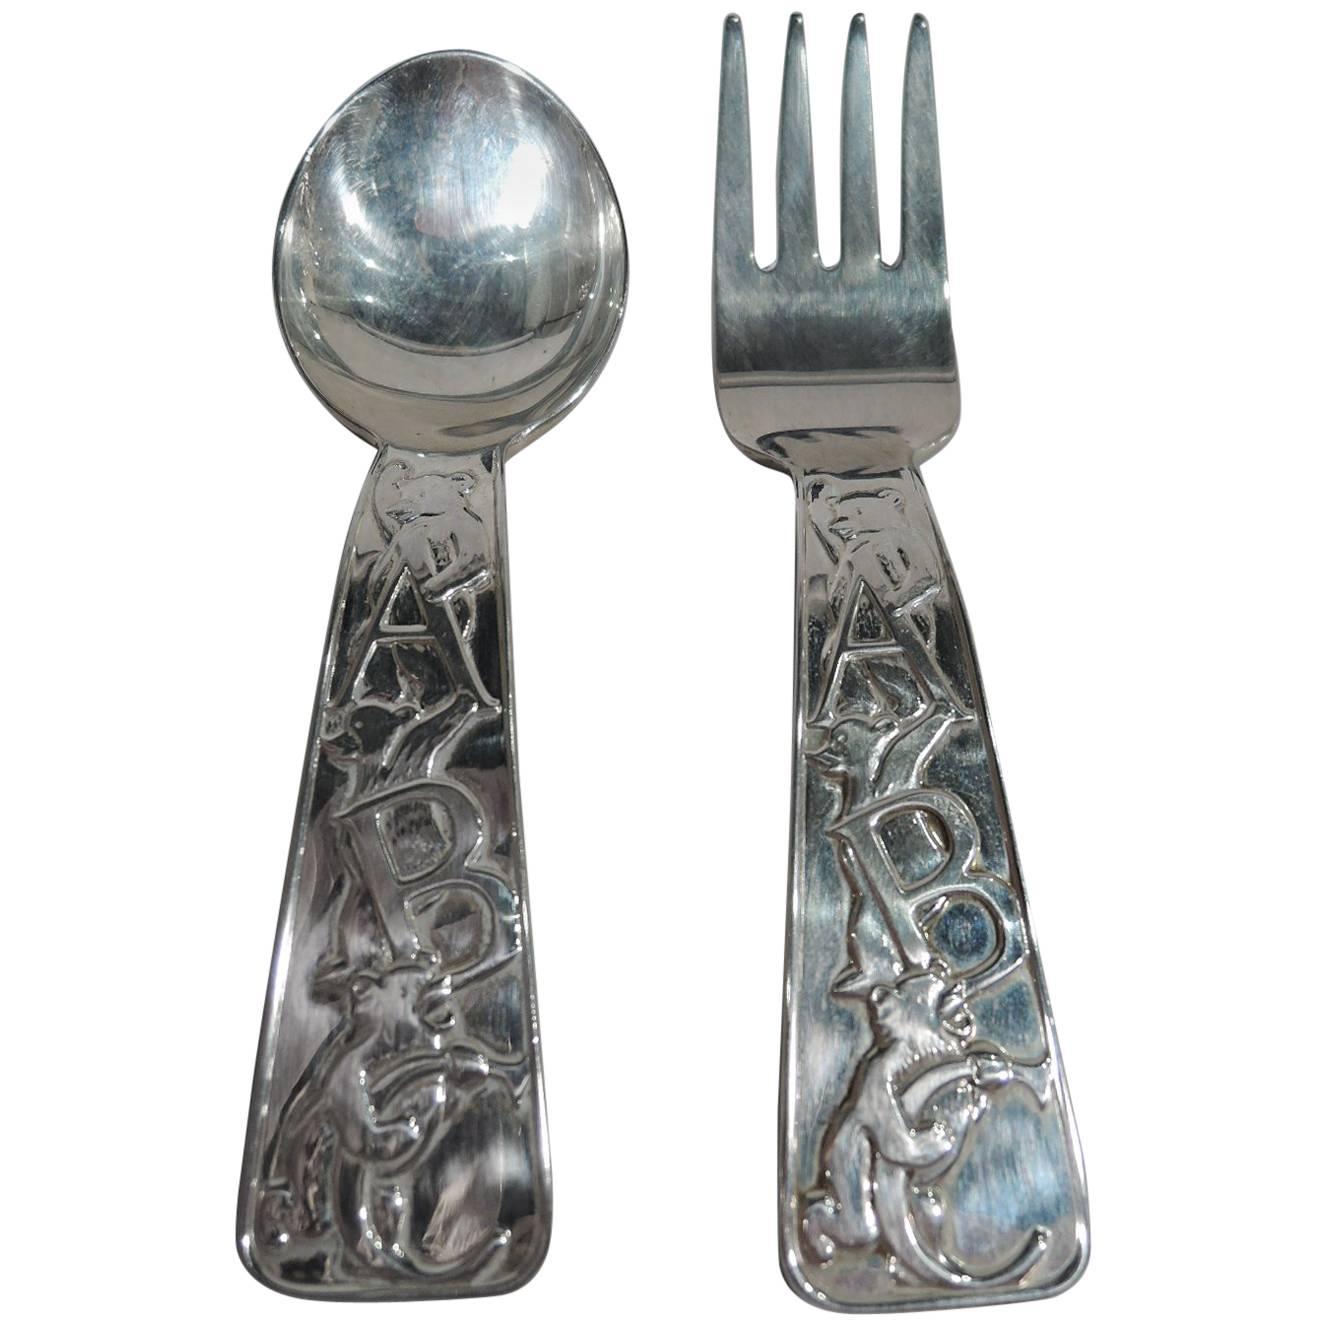 Tiffany Sterling Silver ABC Baby Spoon and Fork with Bears Eating Ice Cream